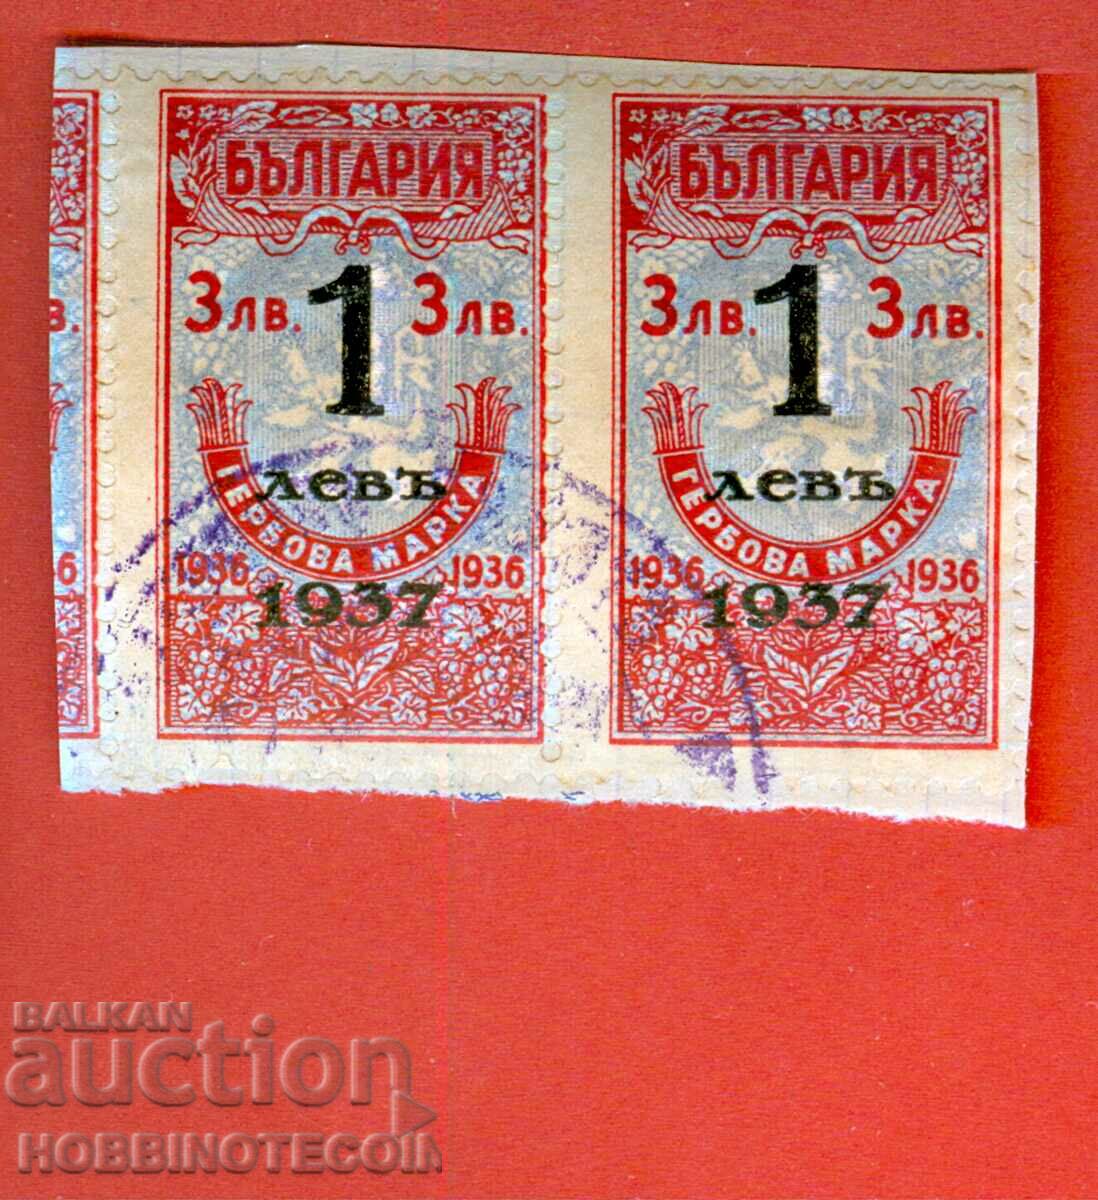 BULGARIA - STAMPS STAMPS 2 x 1/3 BGN 1936 1937